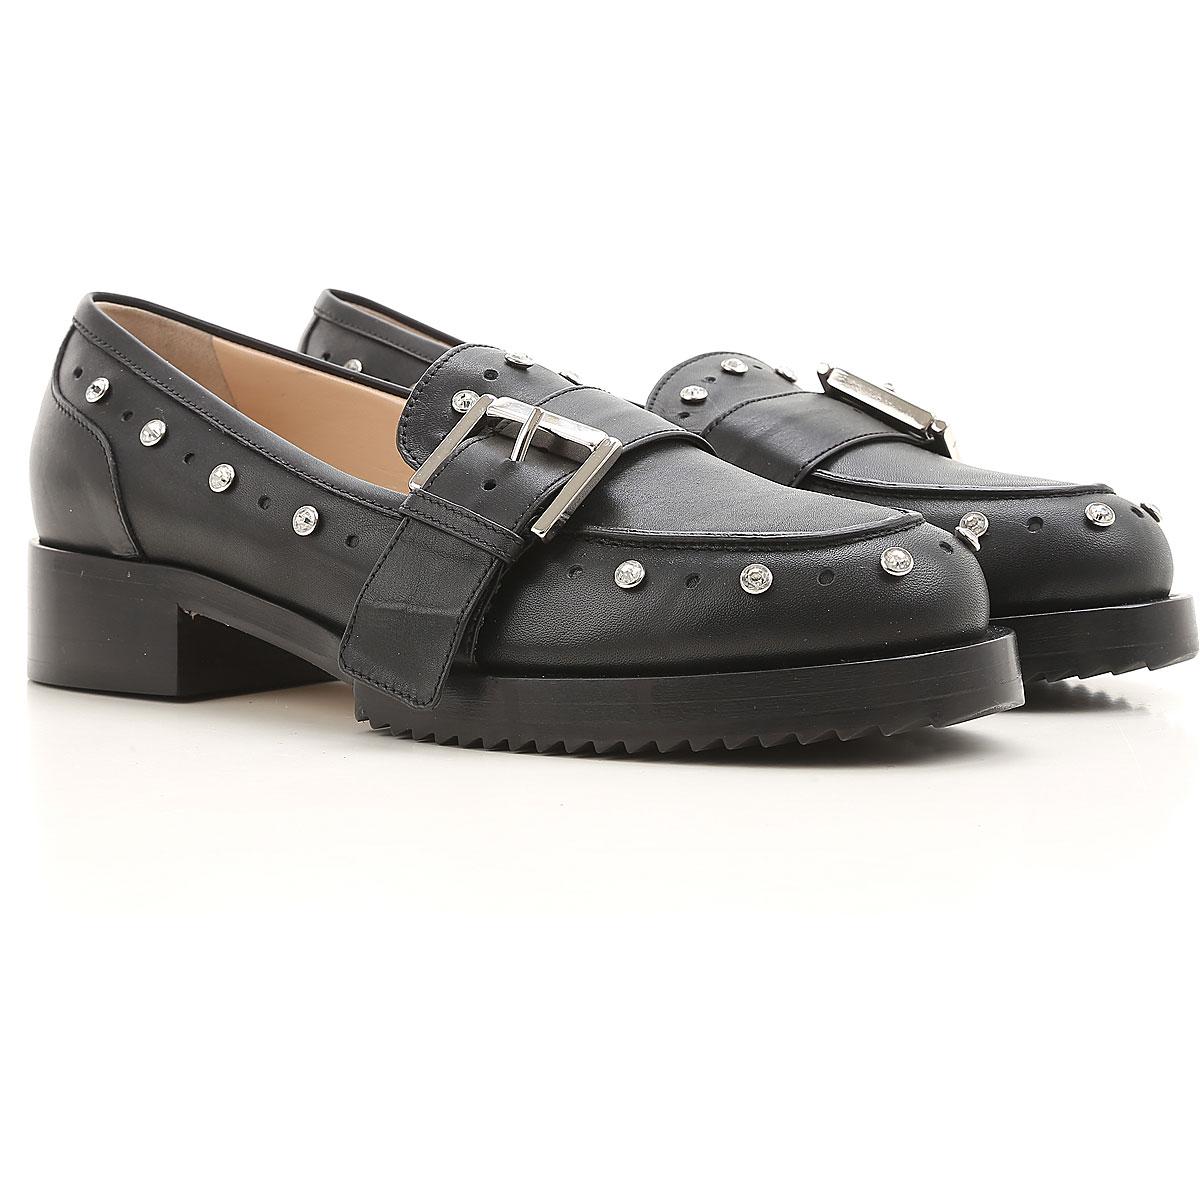 N°21 Leather Loafers For Women in Black - Save 38% - Lyst